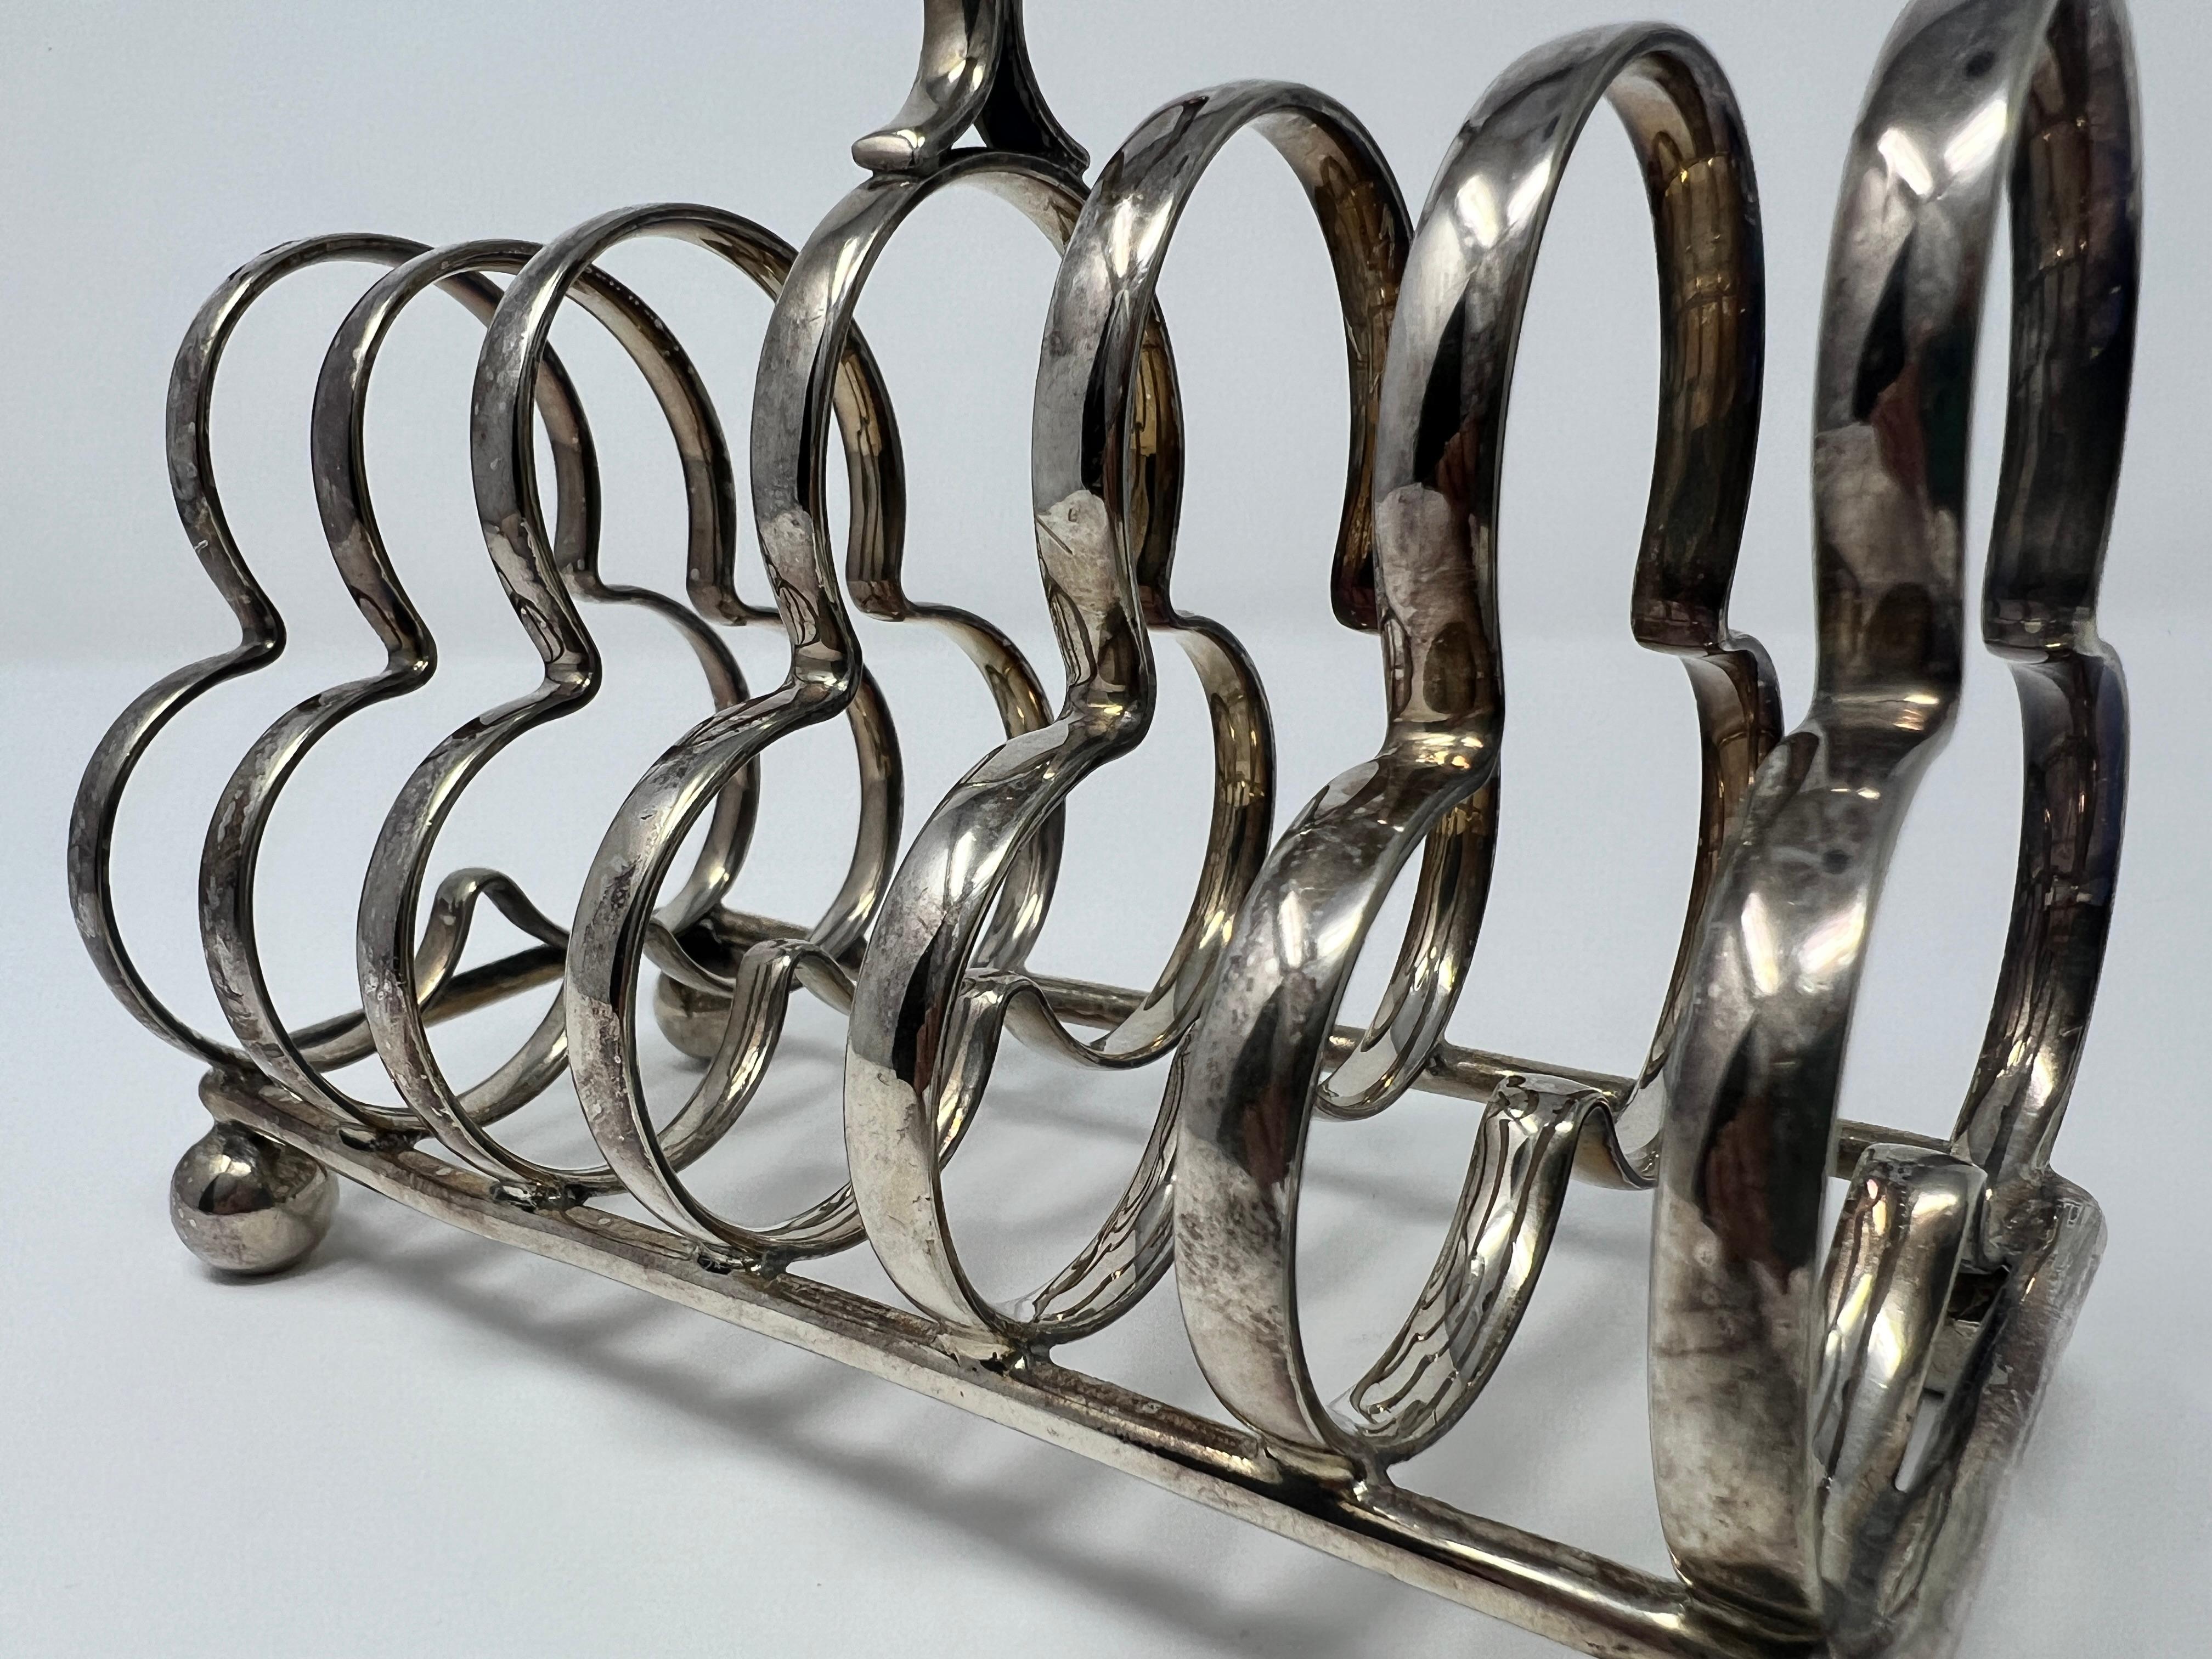 Antique English Silver Plated Toast Rack c 1890-1900 In Good Condition For Sale In New Orleans, LA